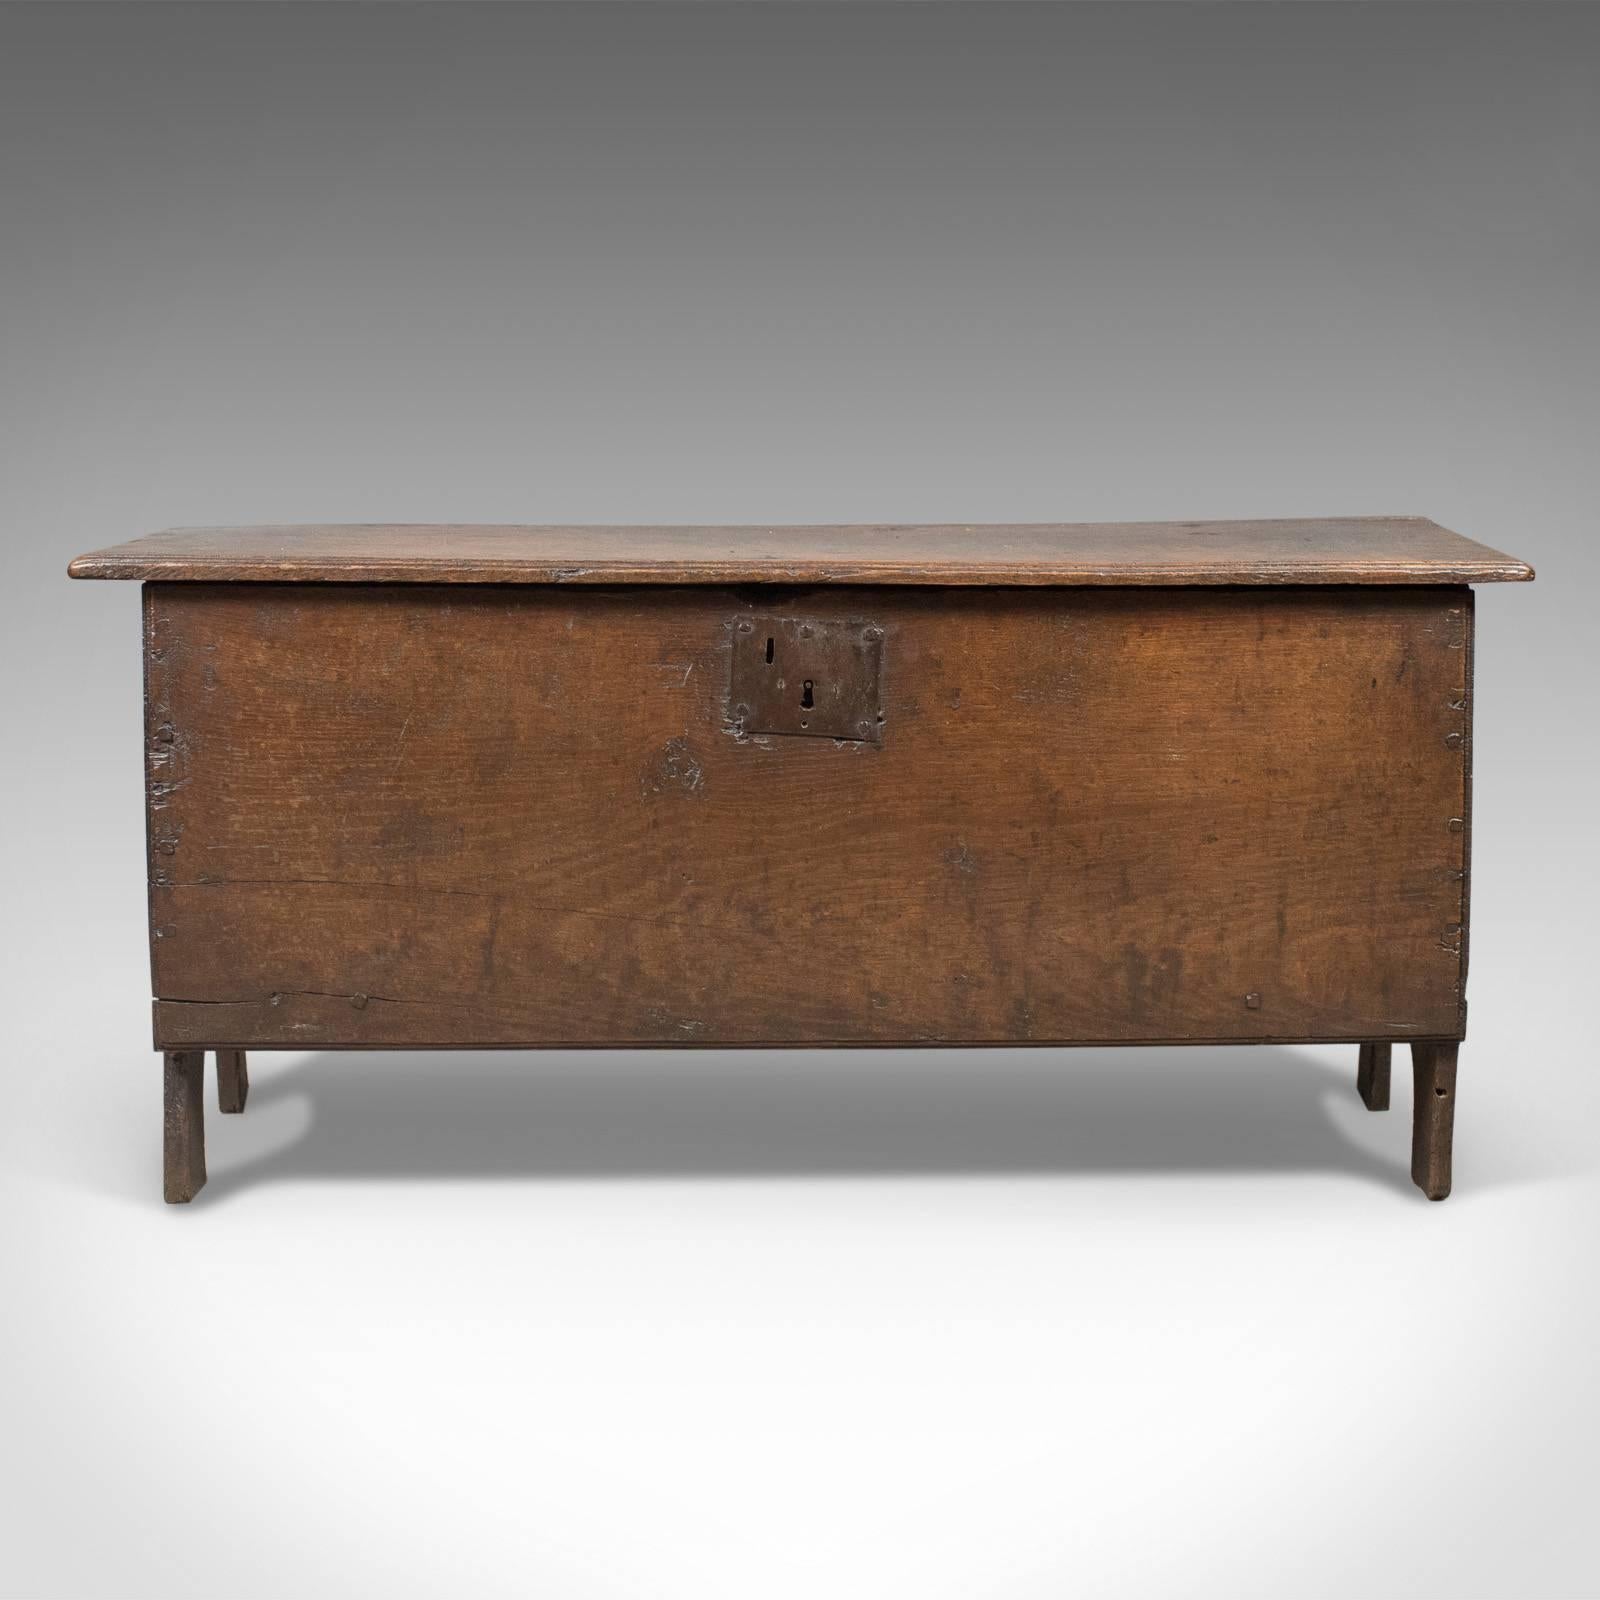 This is an antique coffer, an English 6 plank sword chest in oak dating to the late 17th century circa 1680.

Classic six board construction
English oak with desirable aged patina
Raised on extended stiles with arched 'mouse hole'